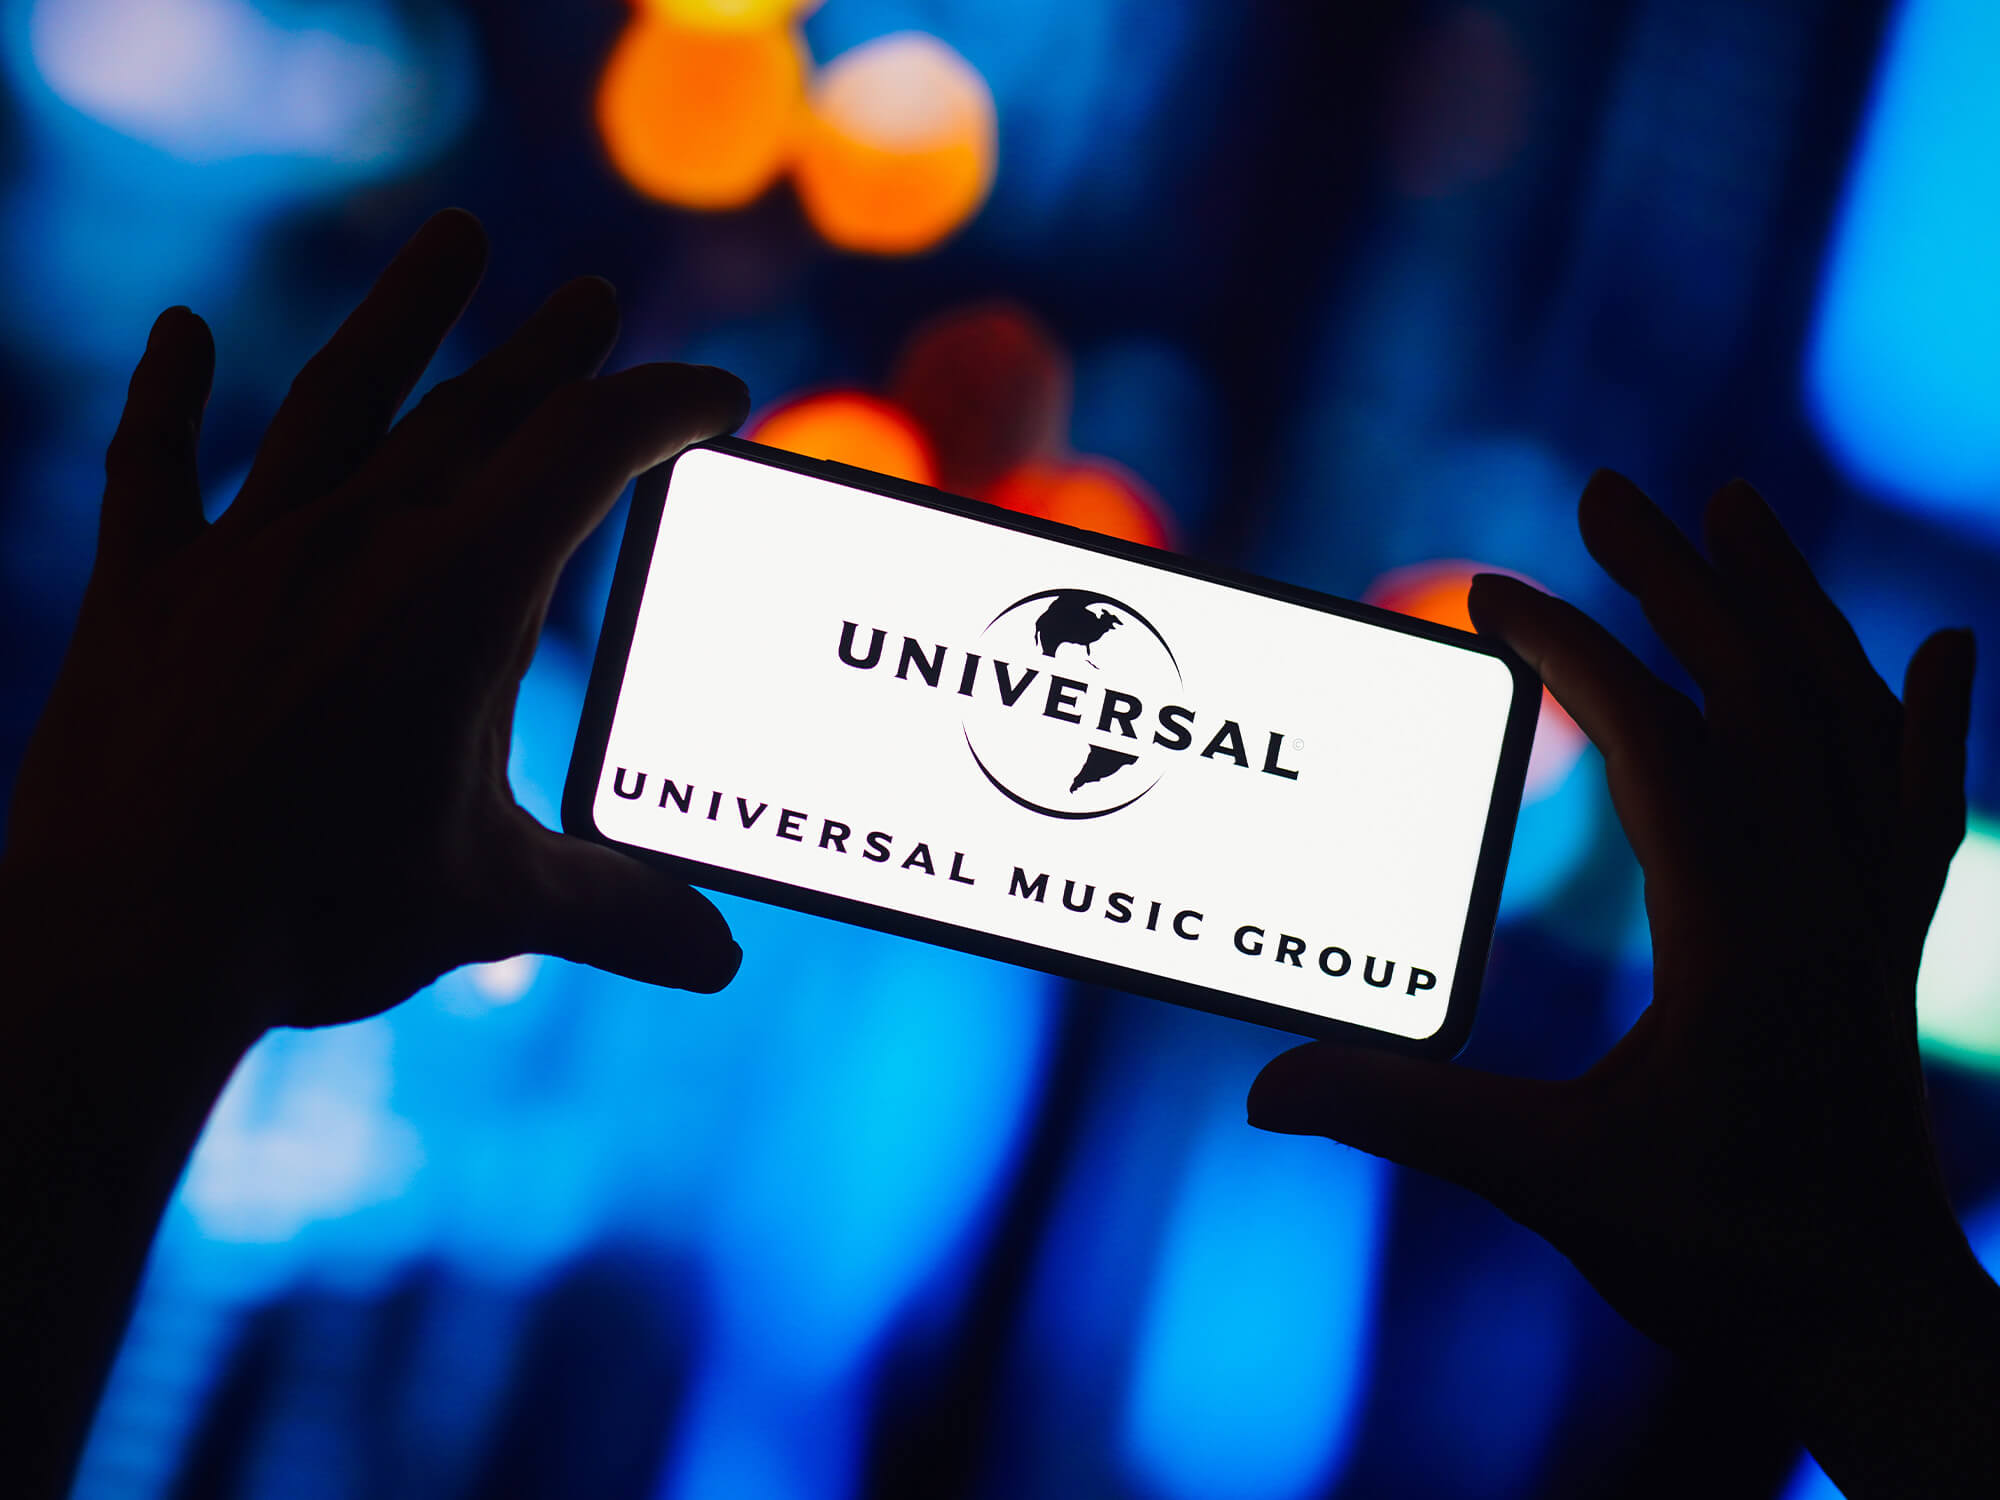 The Universal Music Group logo on a phone screen which is being held up by two hands.